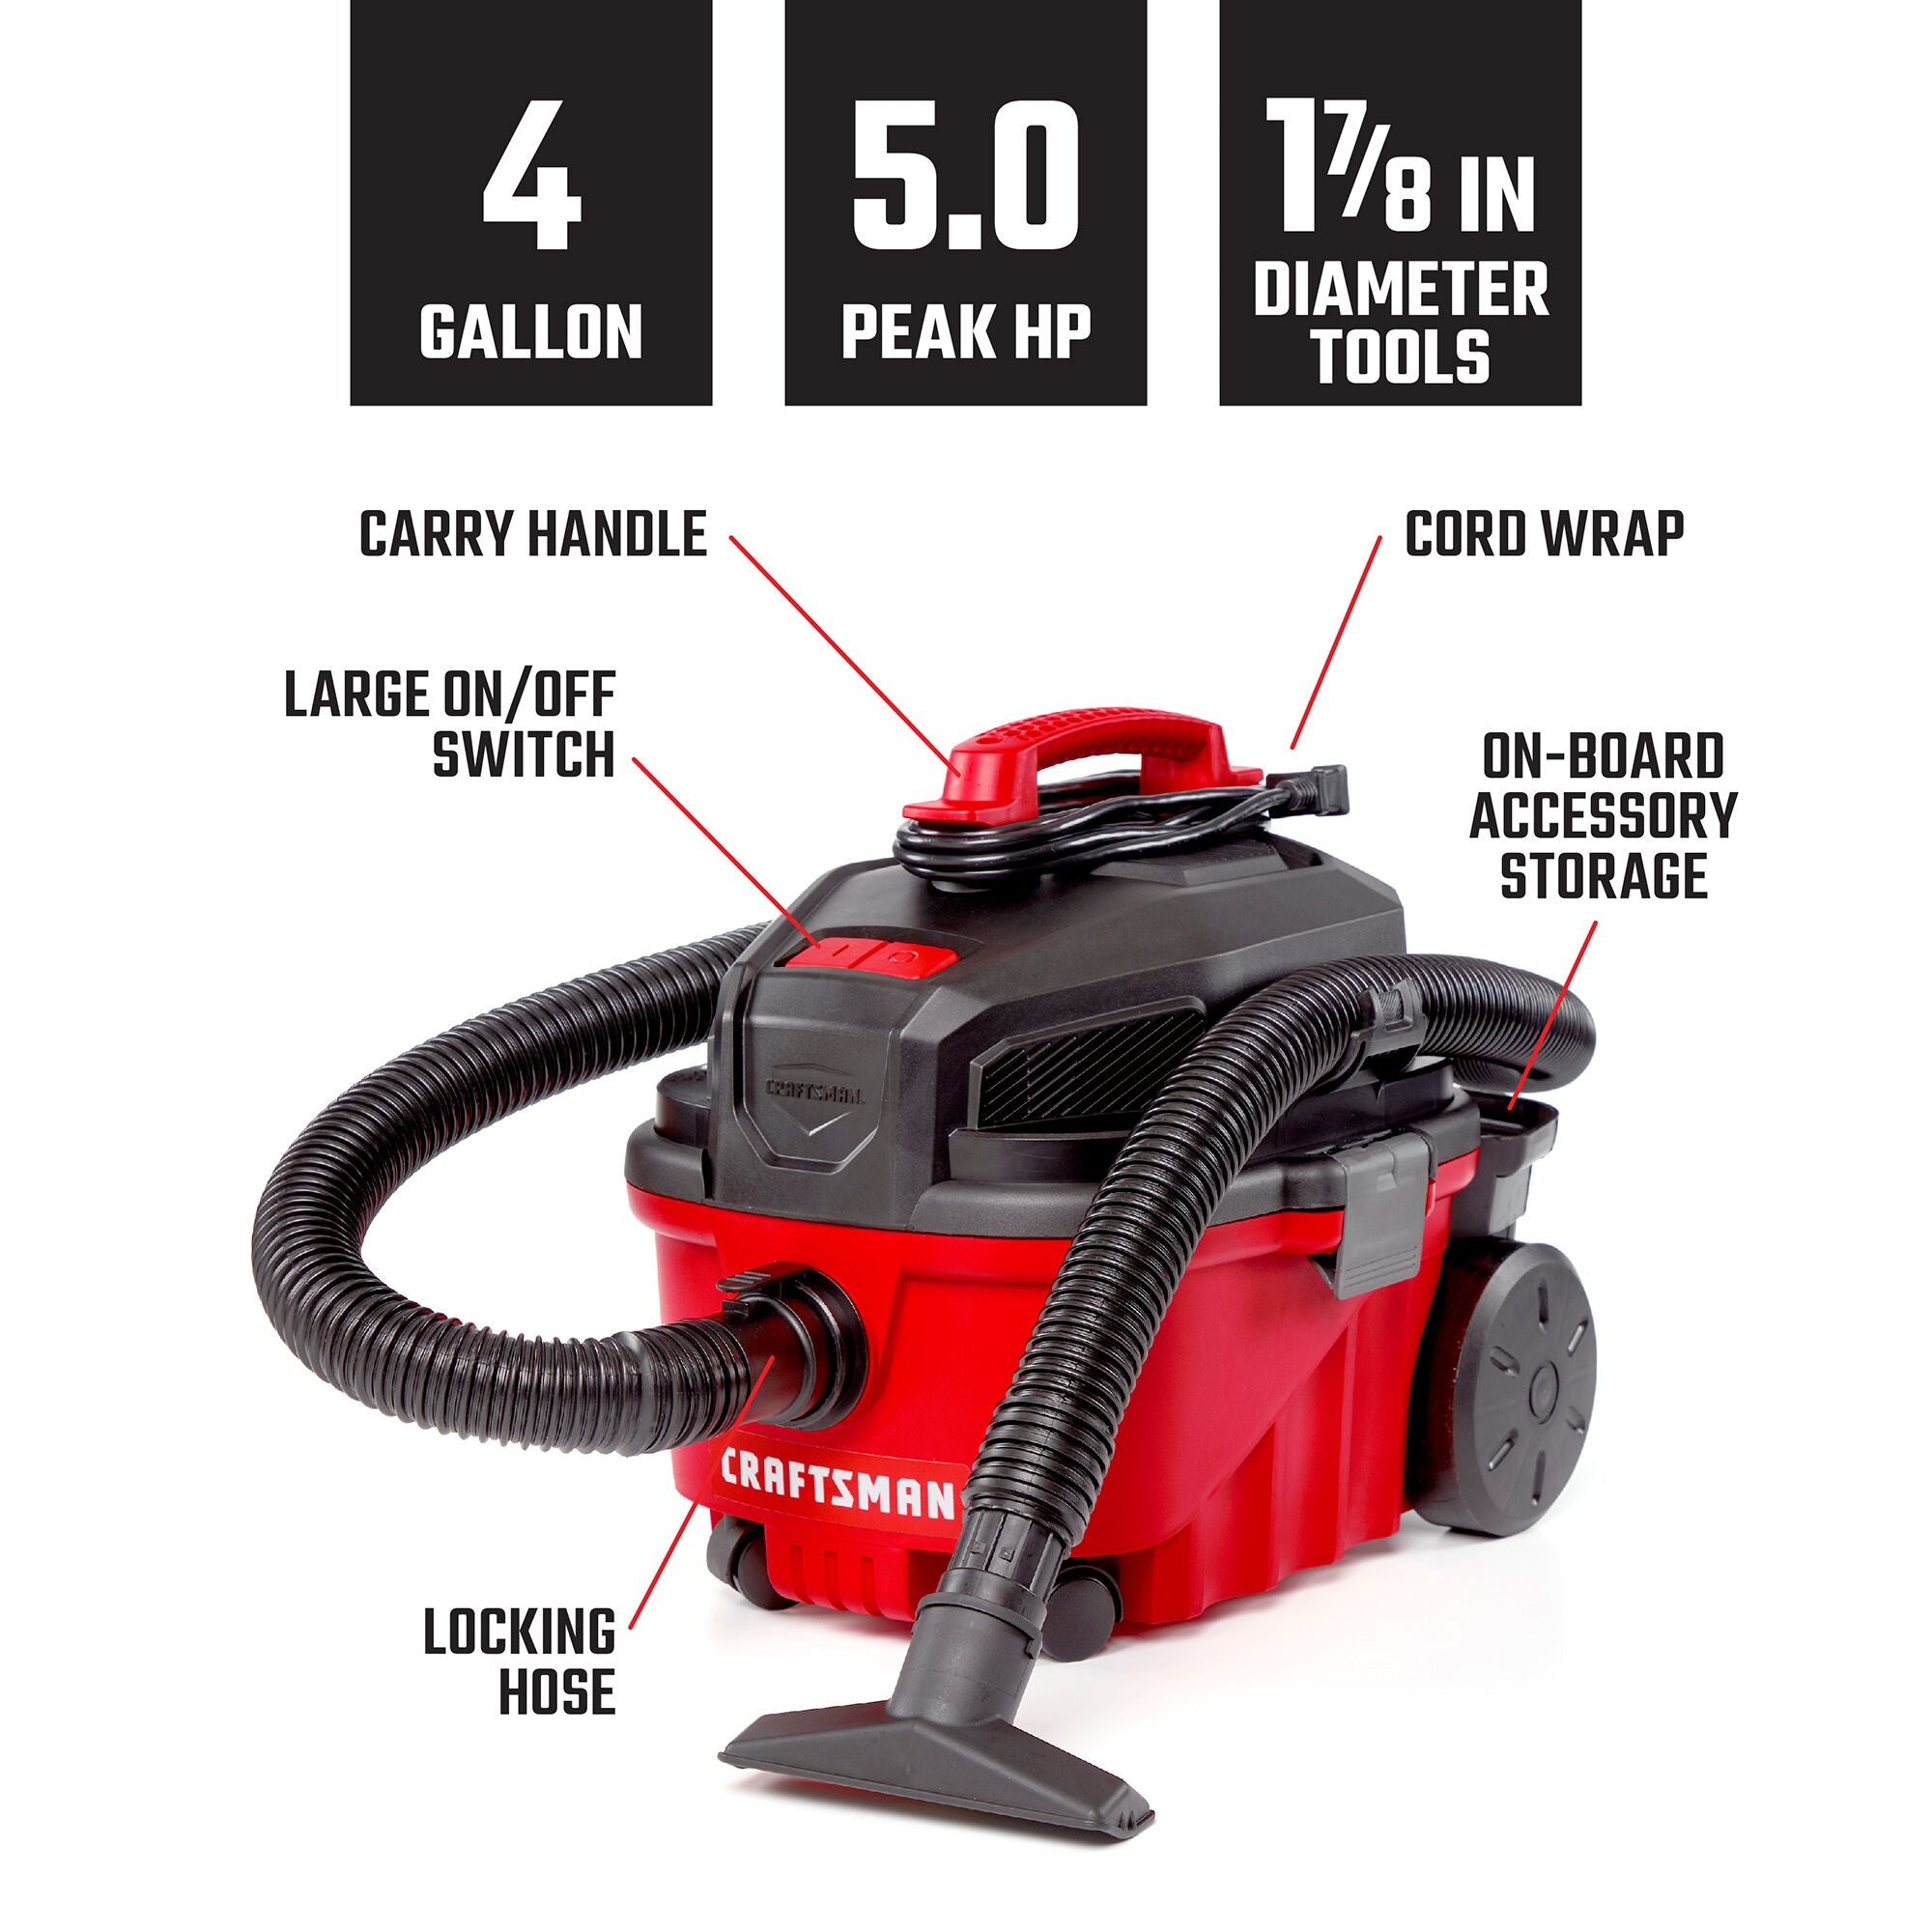 CRAFTSMAN 4 Gallon 5.0 Peak Horsepower Wet Dry Shop Vacuum with features and product specifications